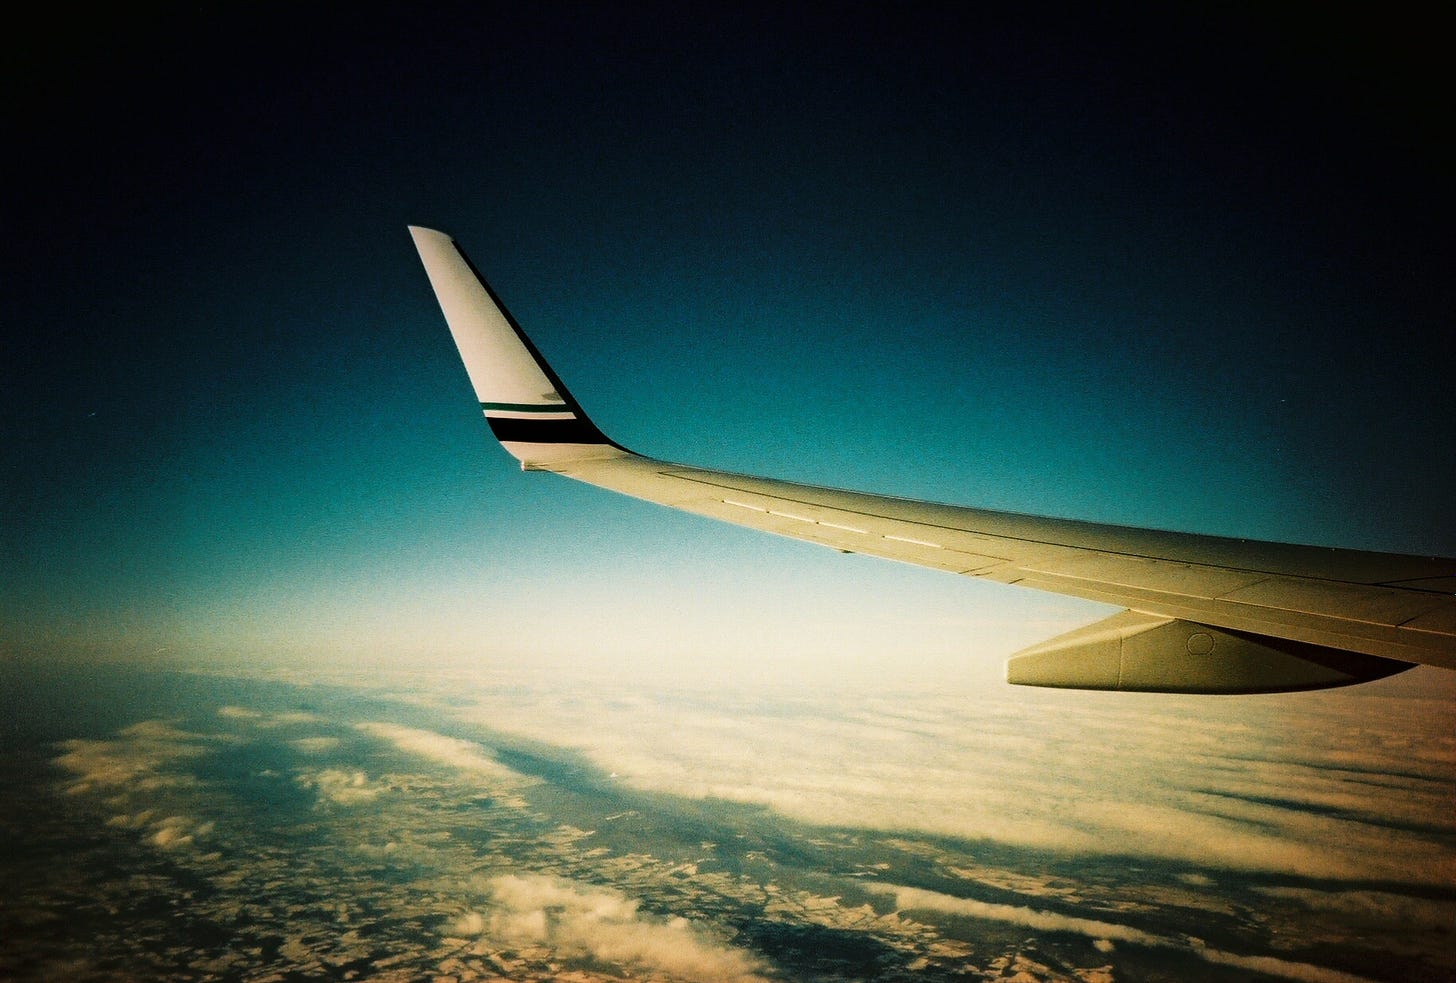 A photograph taken while looking out an airplane window, at the airplane's wing, with the ground far below.